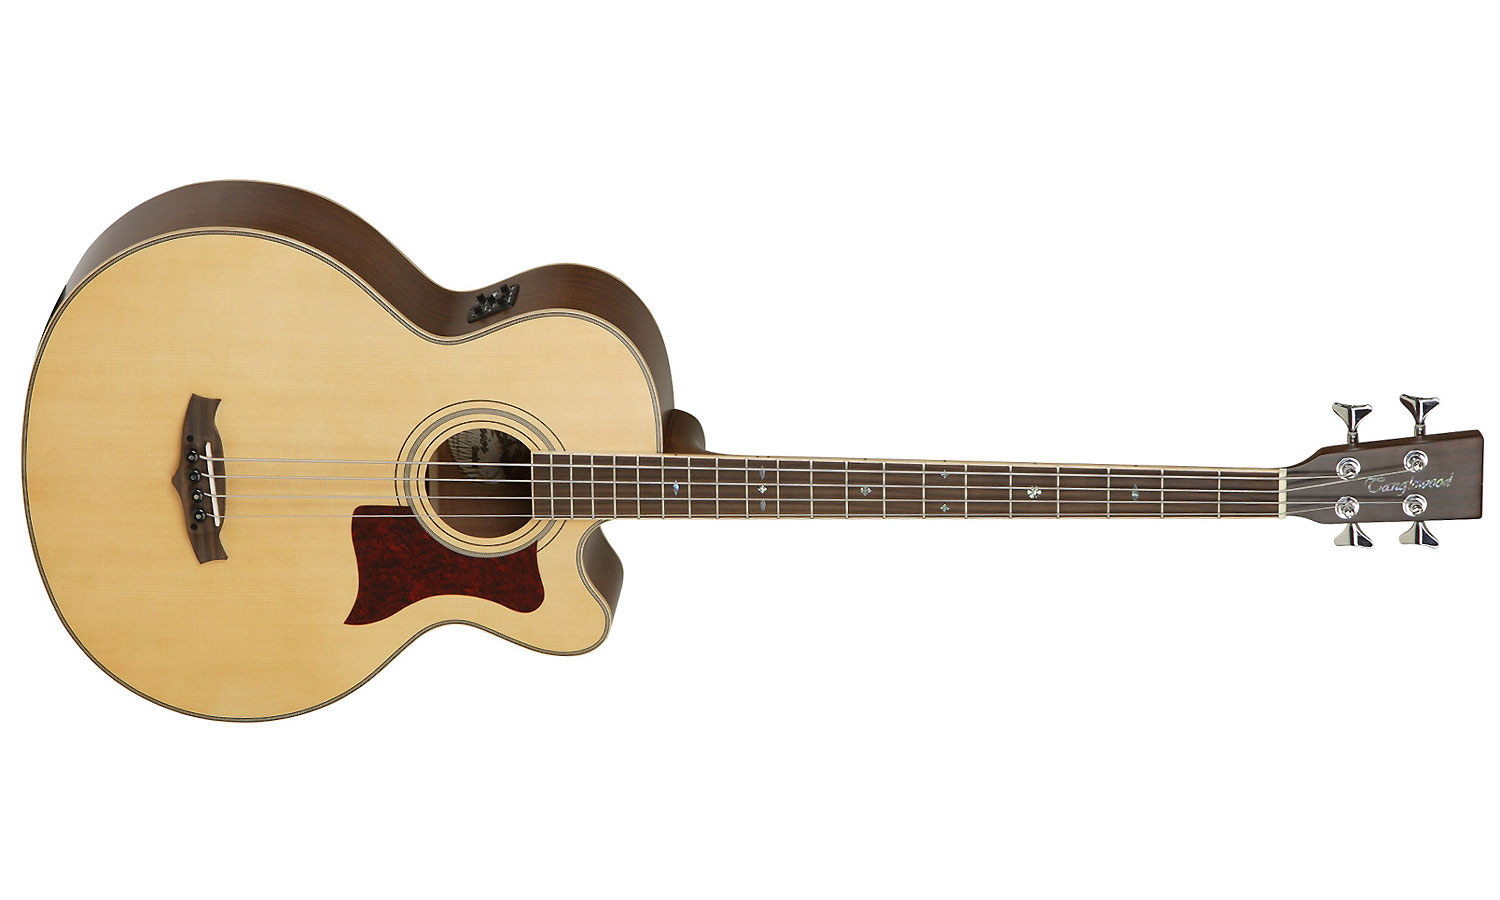 Tanglewood Tw155a Bass Premier Super Jumbo Cw - Natural Satin - Acoustic bass - Variation 1